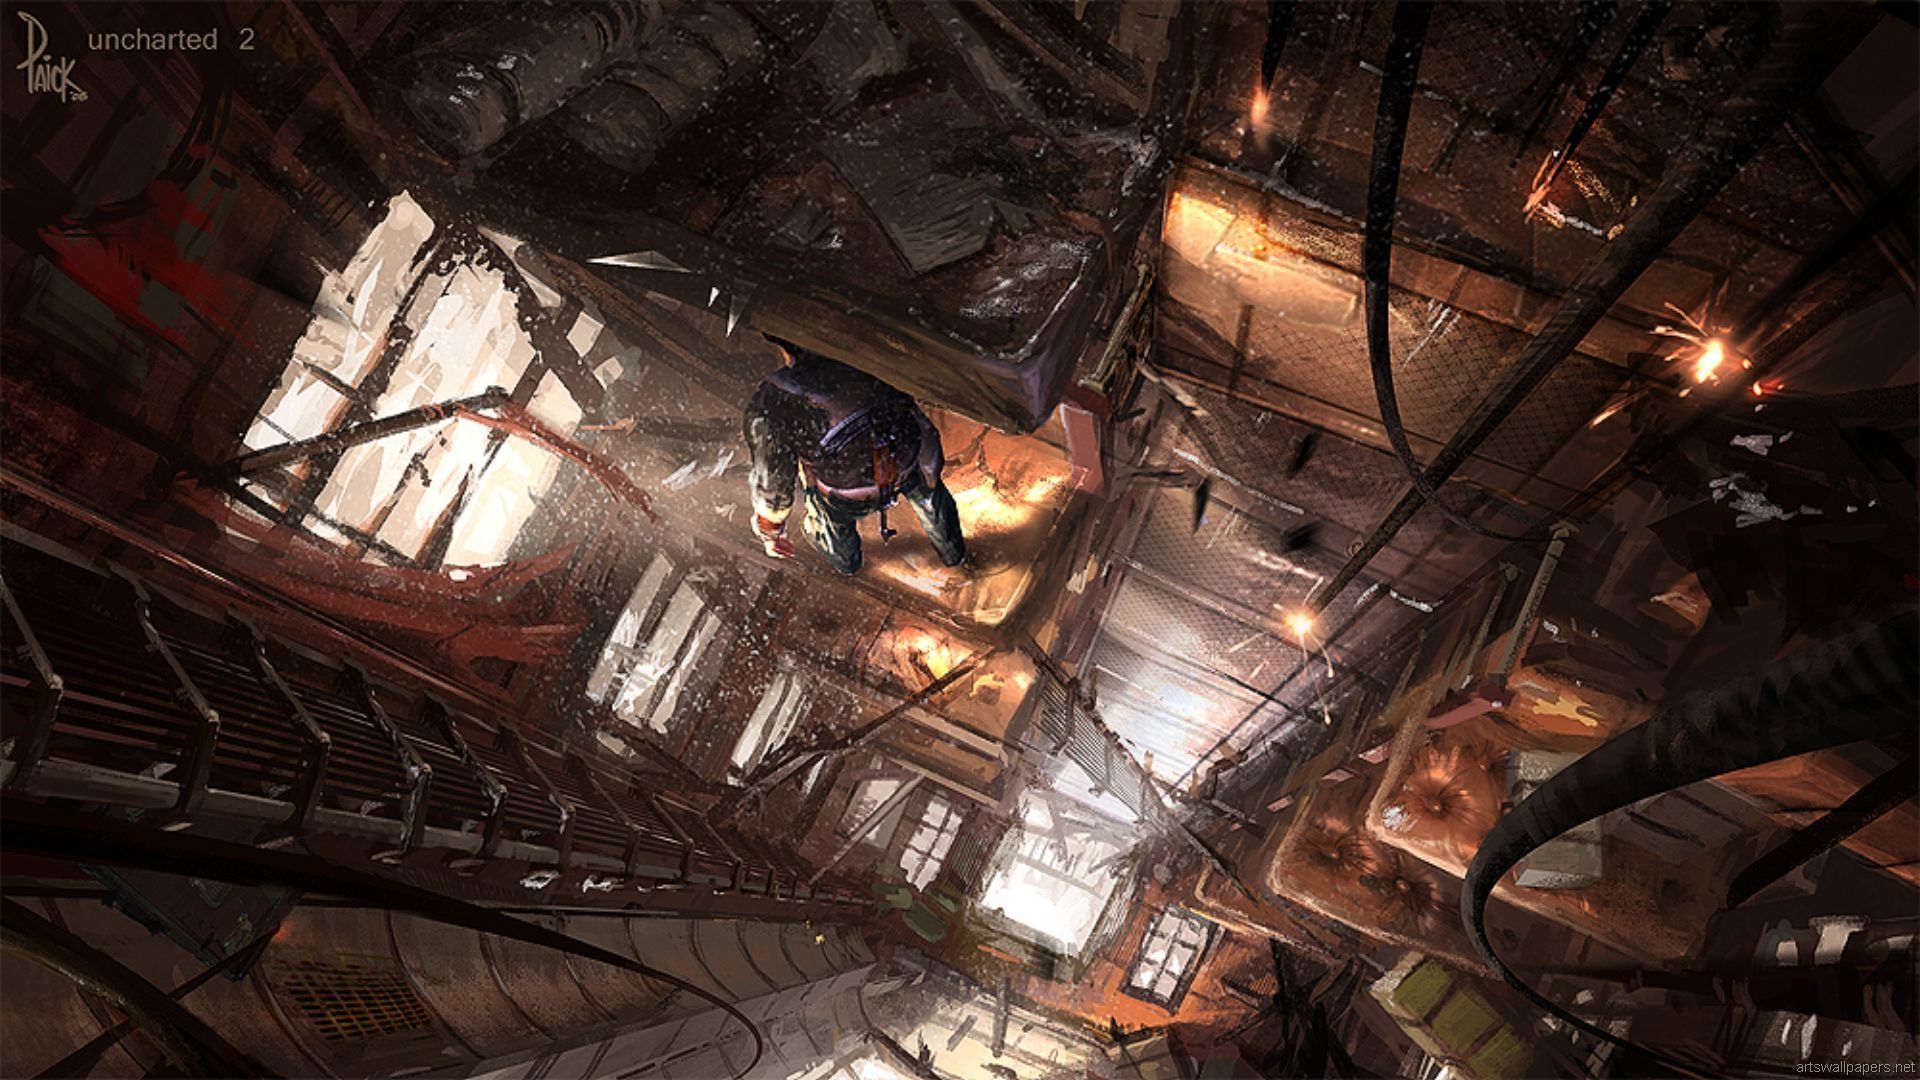 Uncharted 2: Among Thieves Computer Wallpapers, Desktop ...